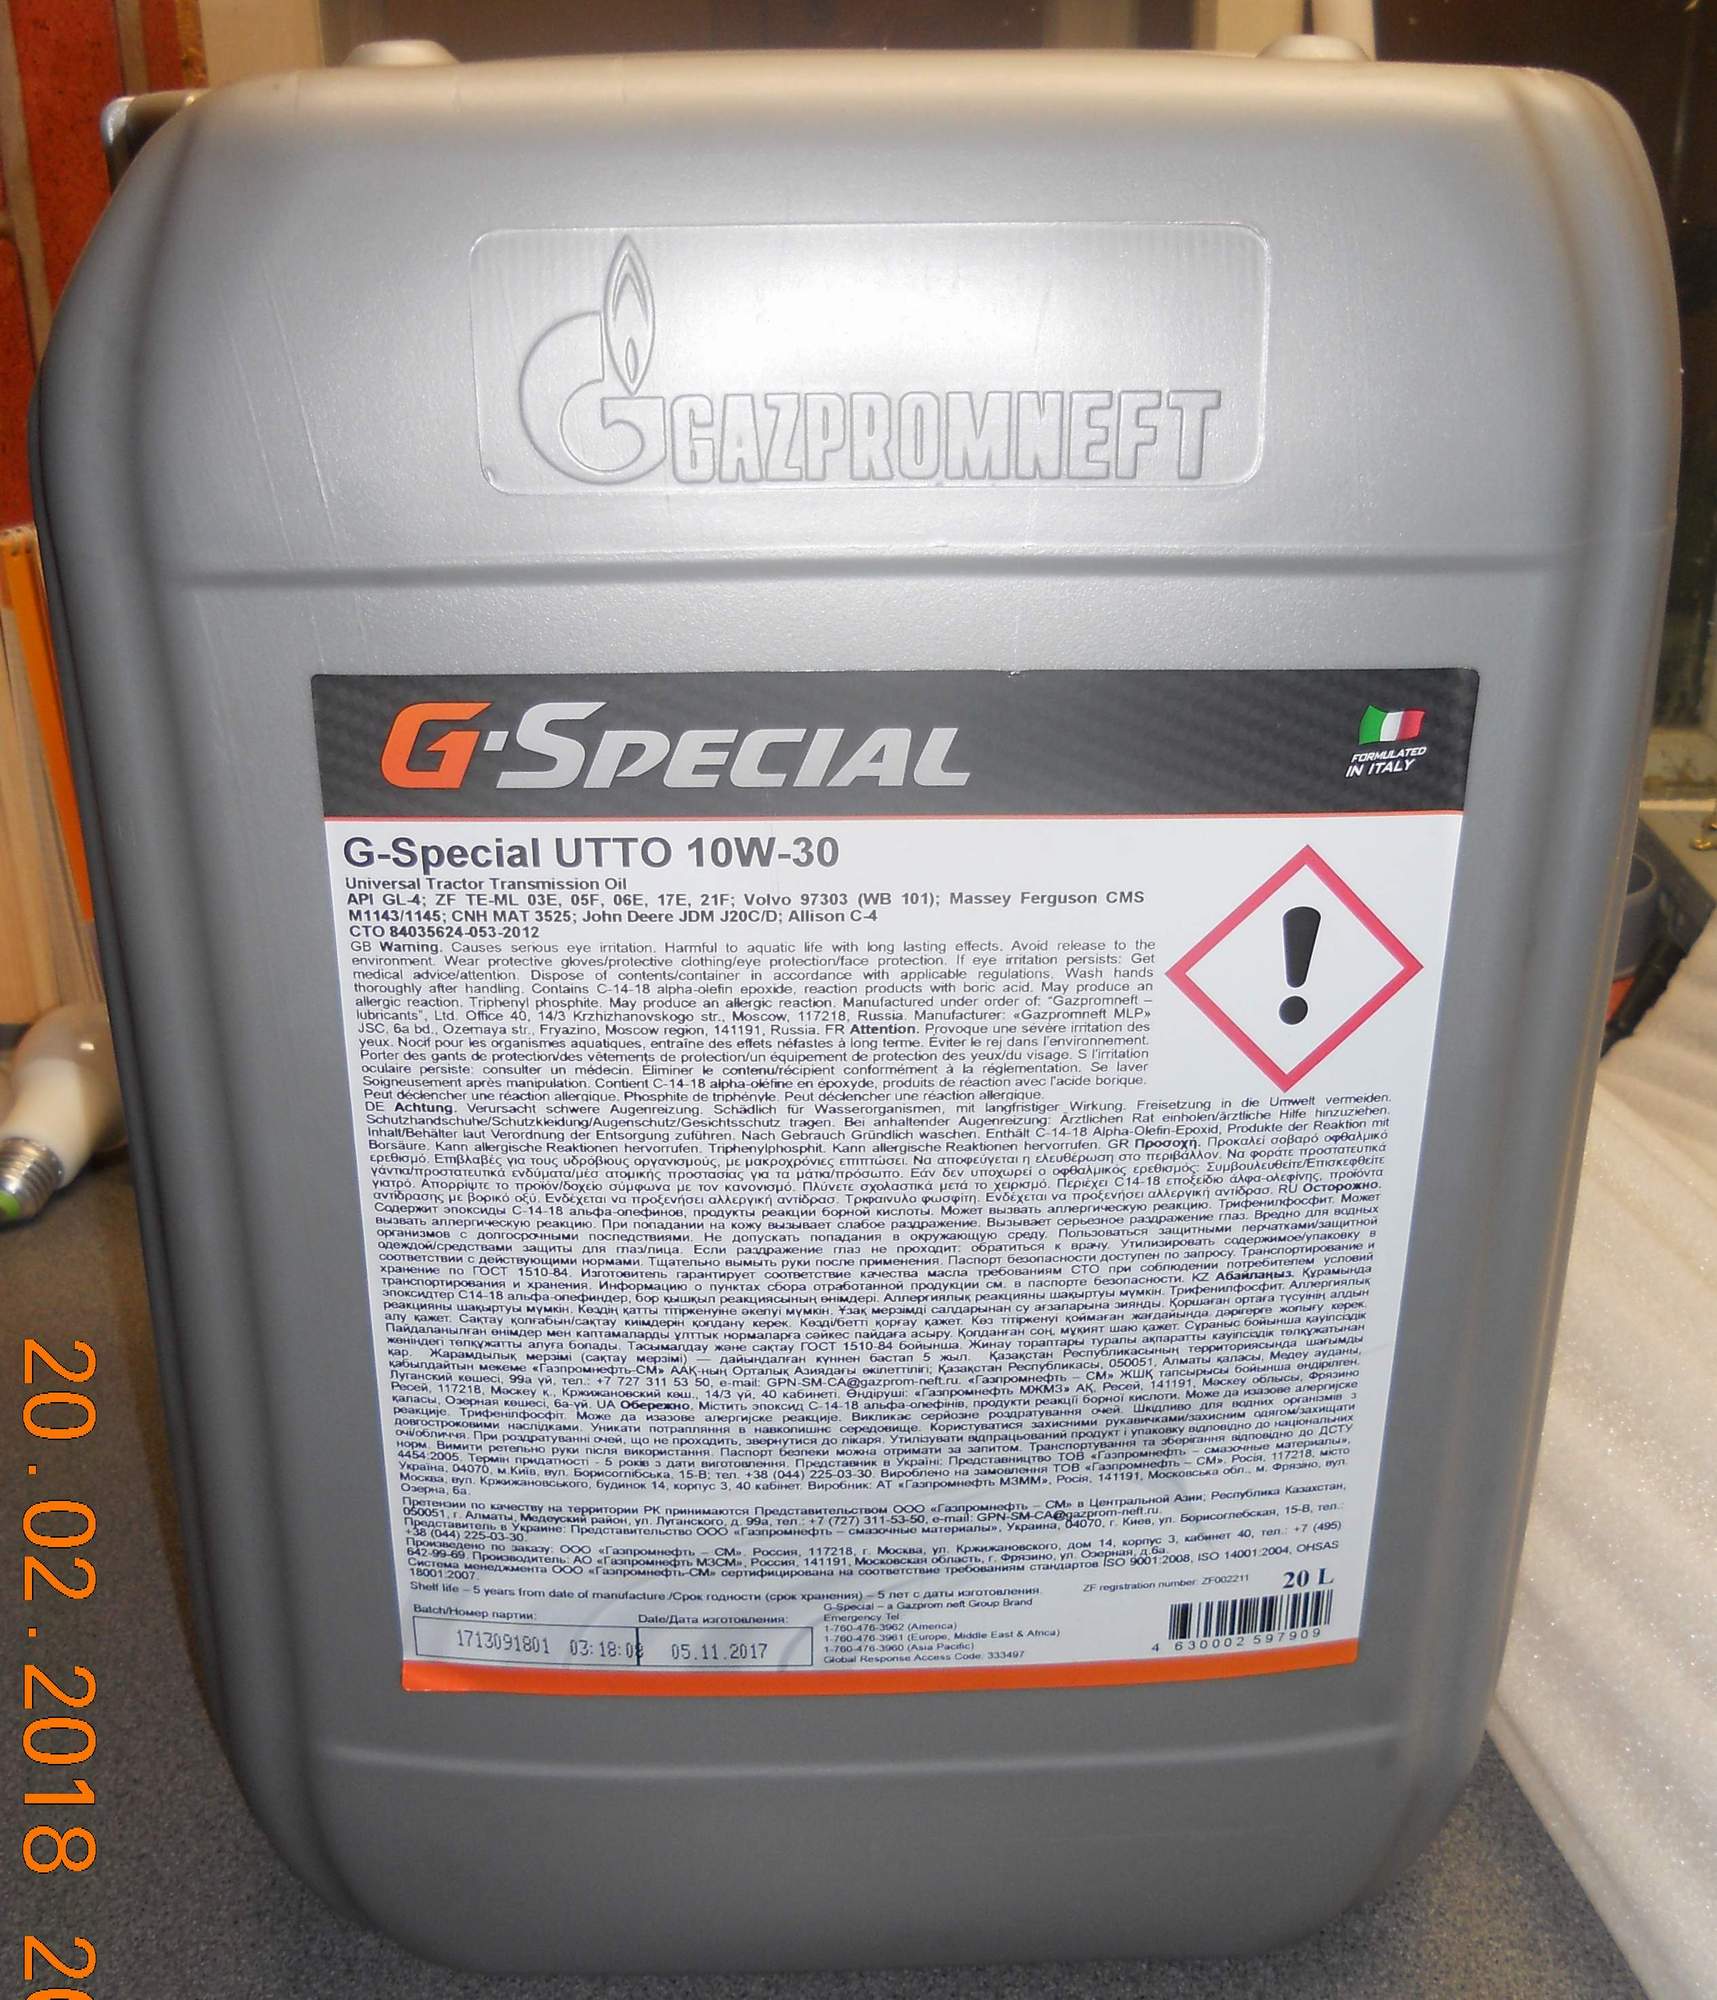 G special utto 10w 30. Масло g-Special UTTO 10w30 20л 253390107. G-Special UTTO 10w30 20л. G Special UTTO 10w30 20л артикул.